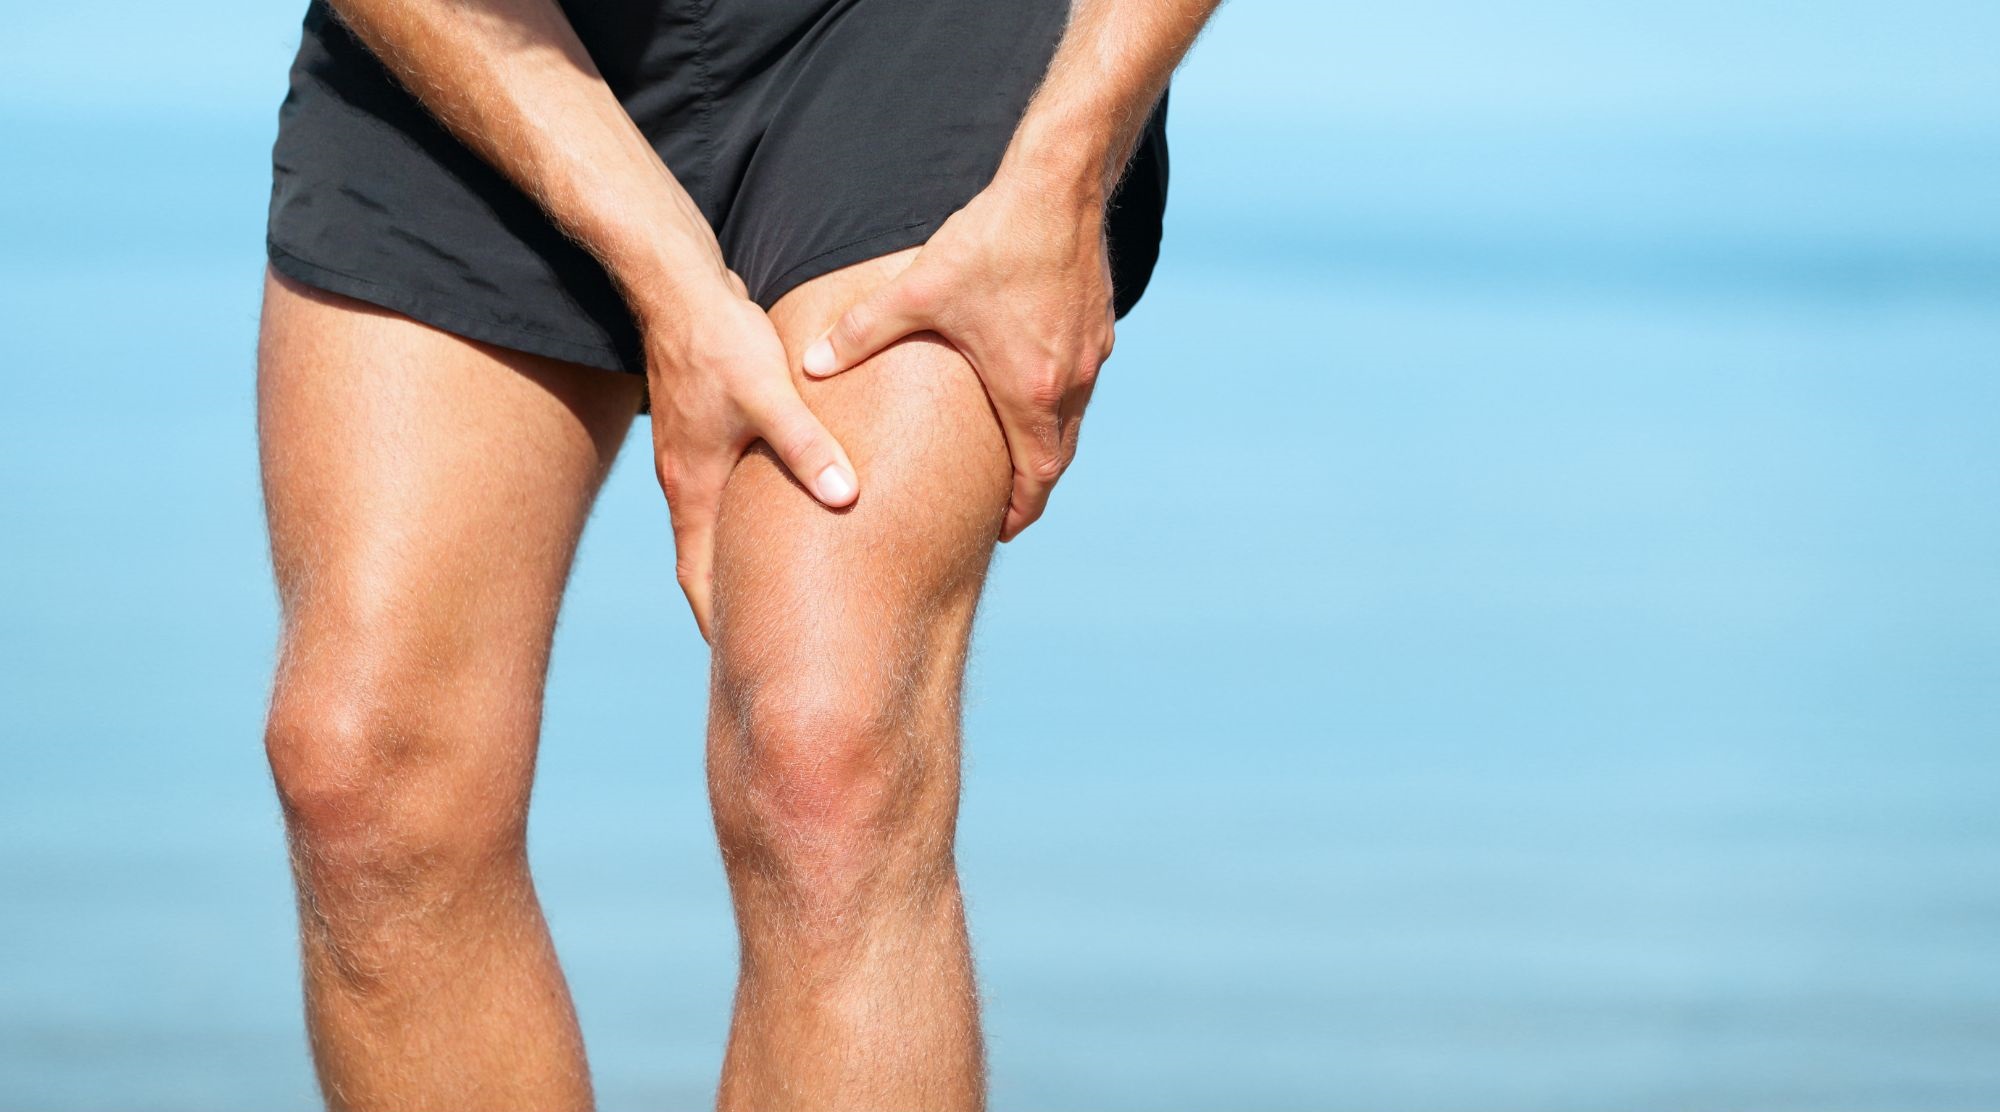 How To Prevent And Recover From Sports Injuries And Get You Back To Training Fast